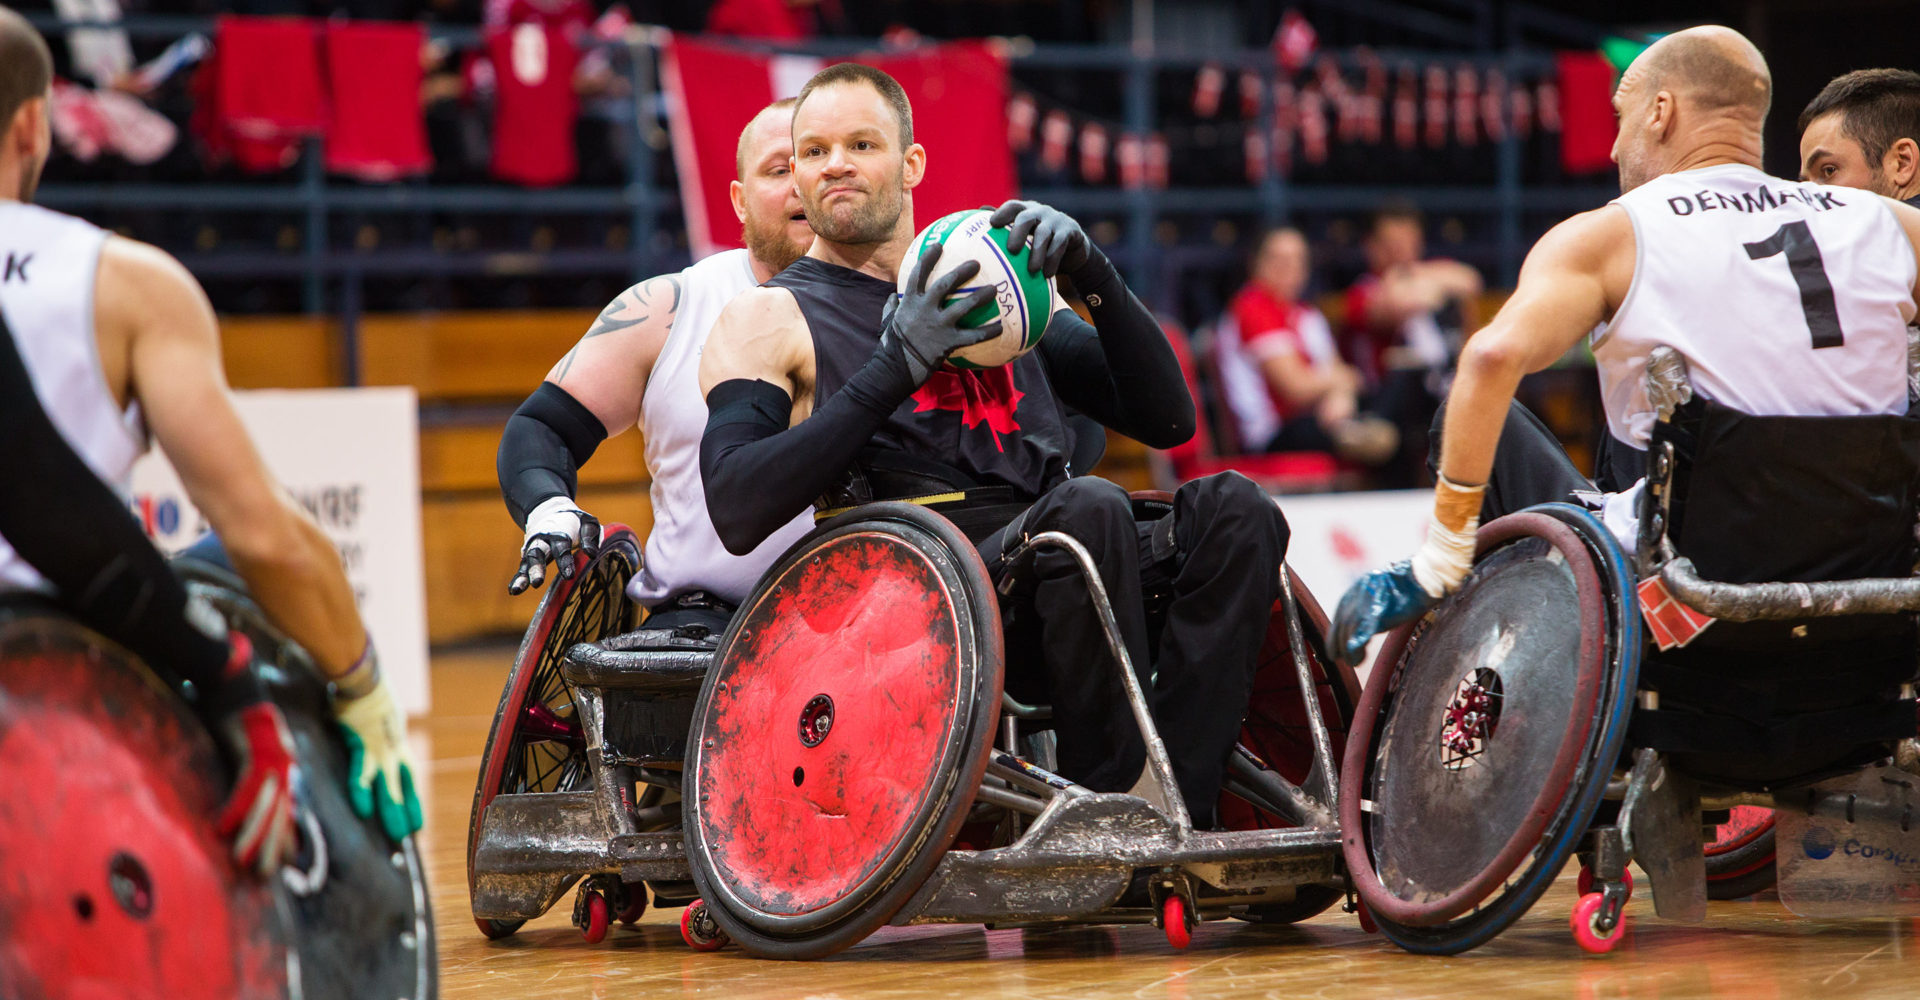 Vancouver to hold draw for 2020 IWRF Paralympic Qualification Tournament